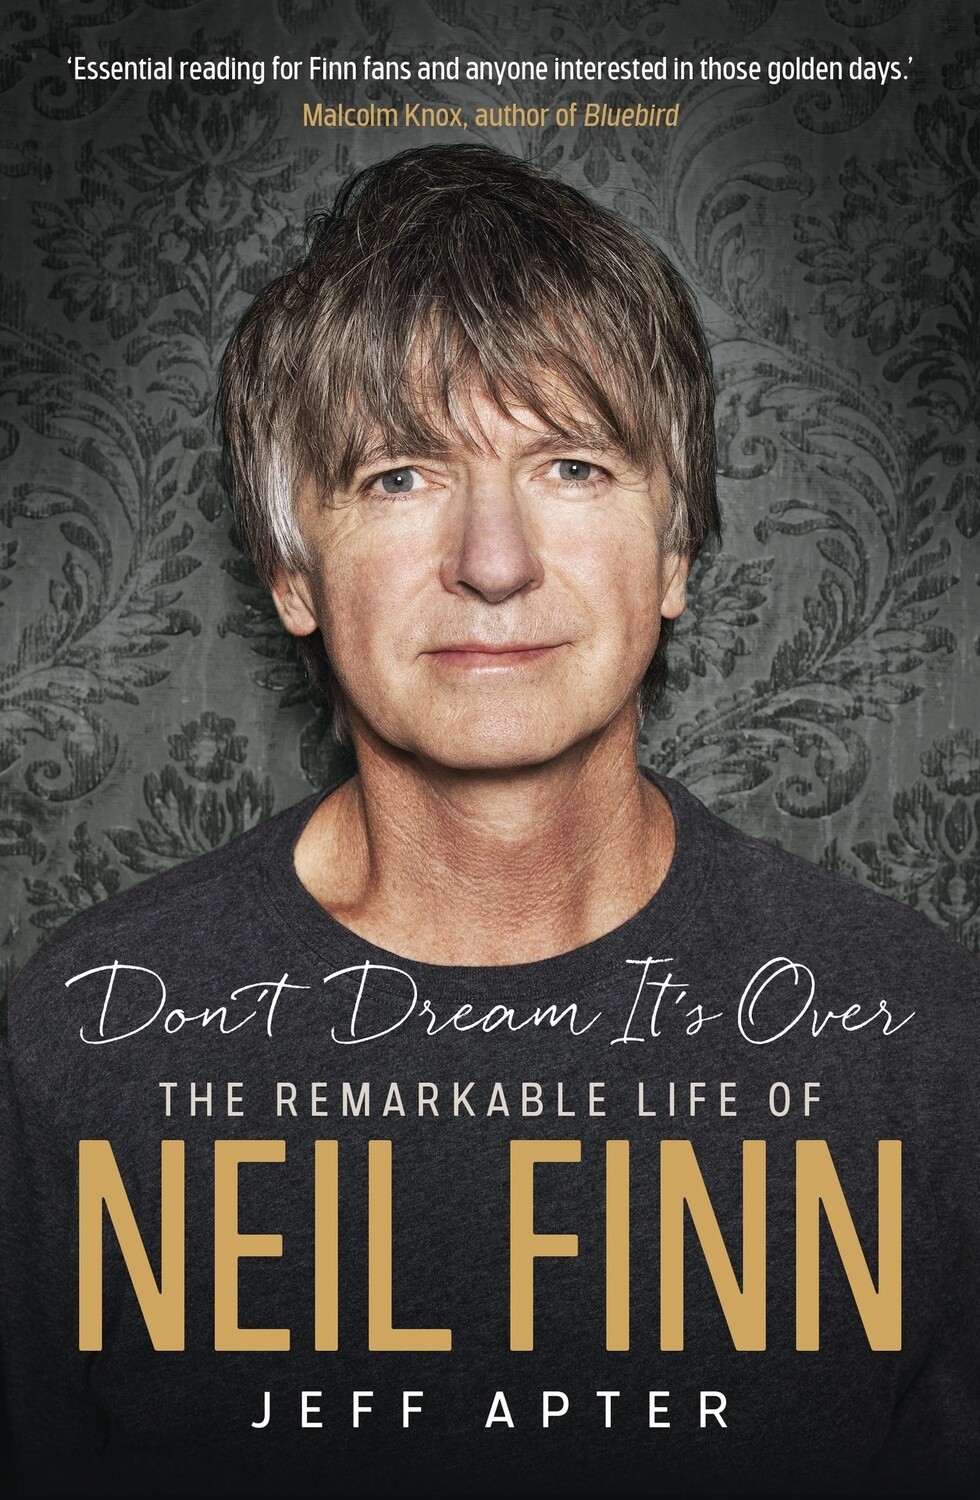 Don't Dream It's Over: The remarkable life of Neil Finn by Jeff Apter